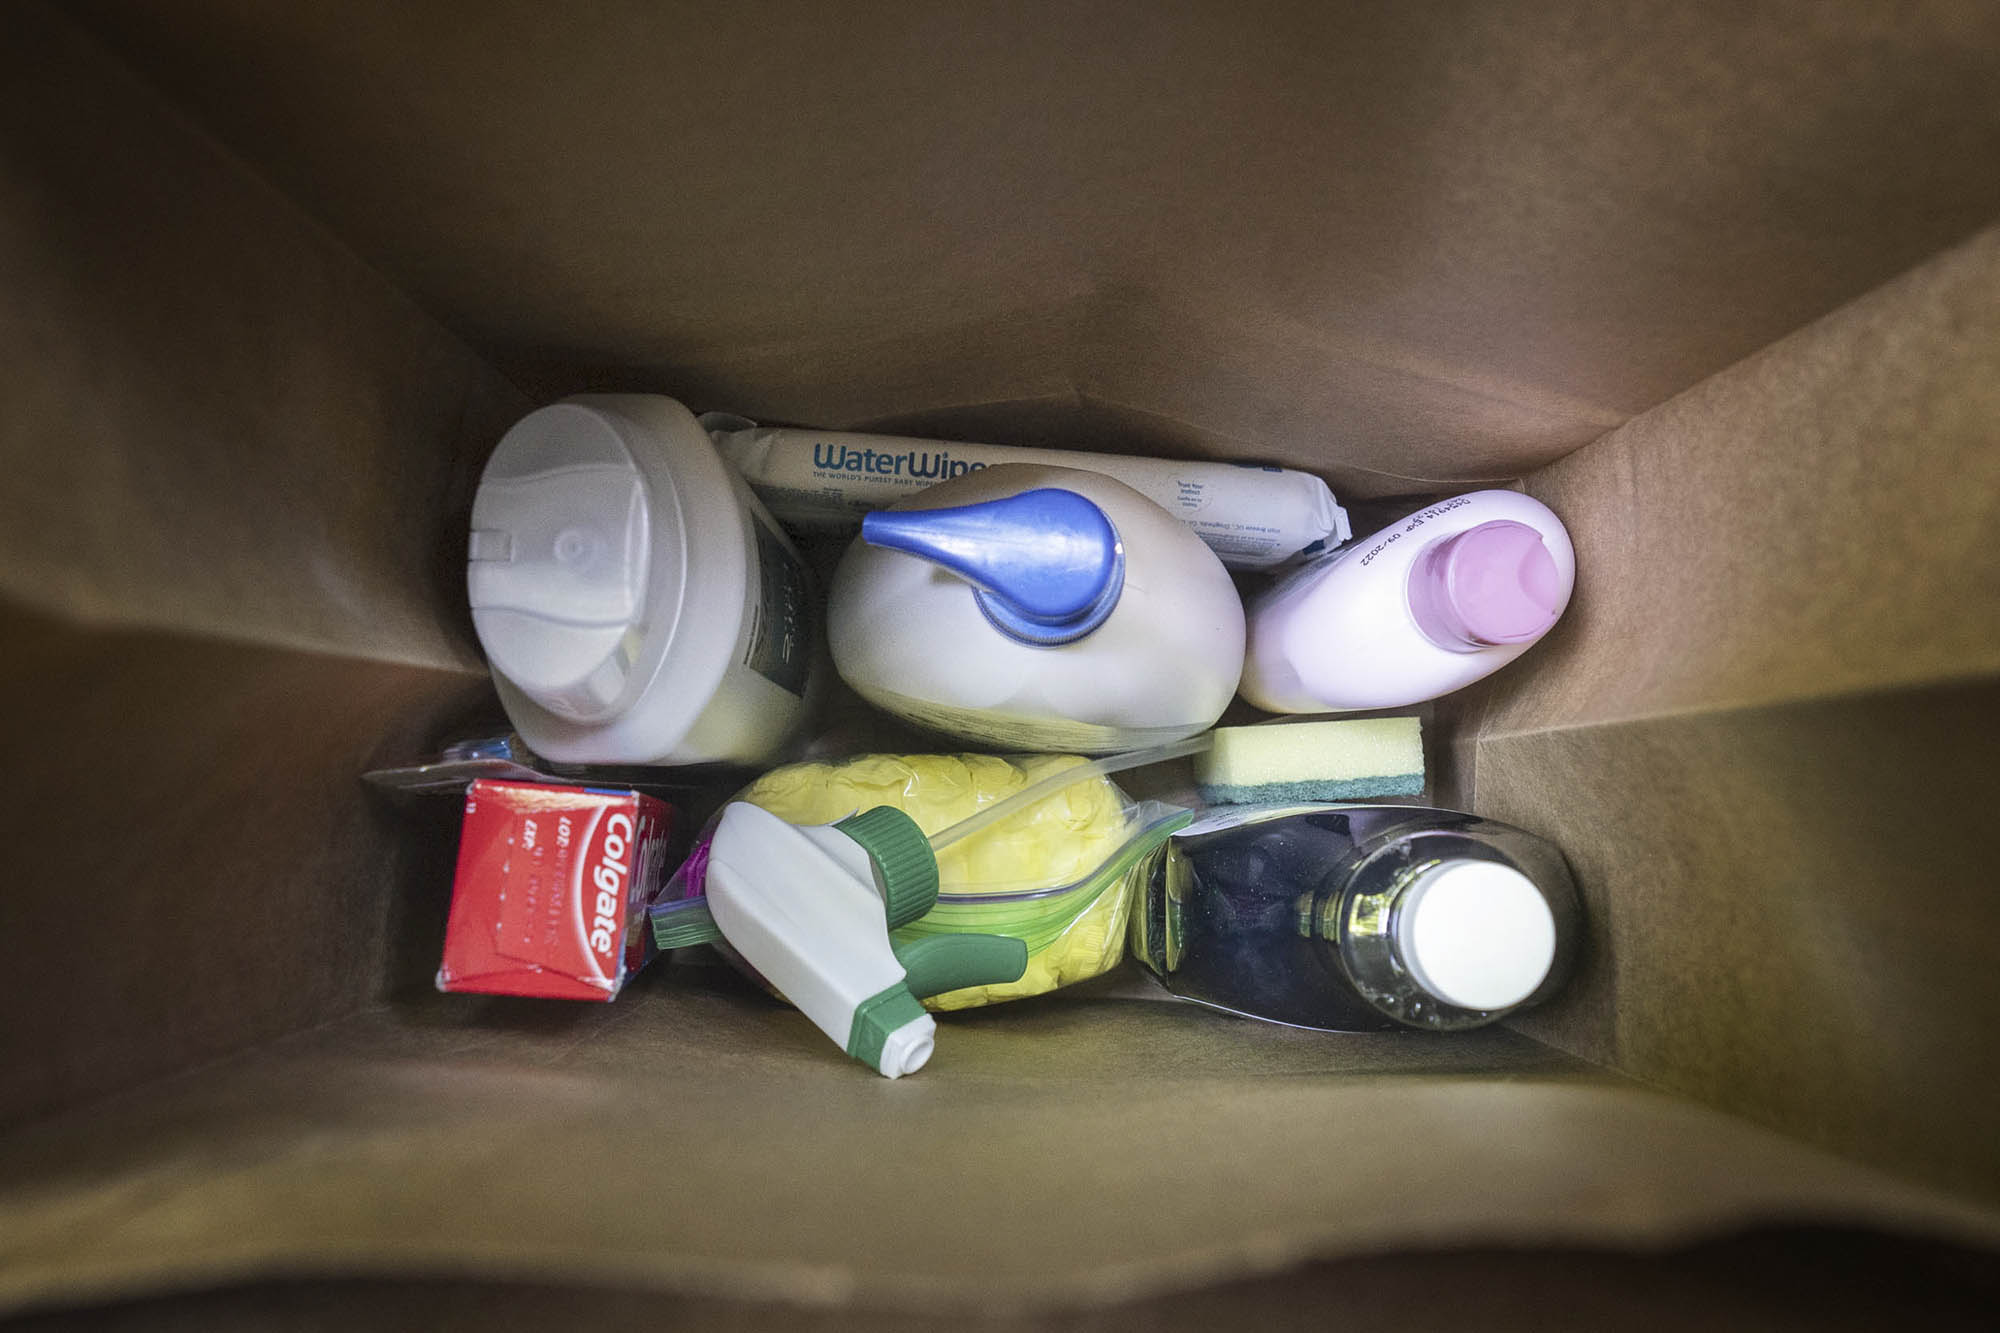 Brown bag filled with essential feminine hygiene products, cleaning supples and dish detergent, and various other supplies